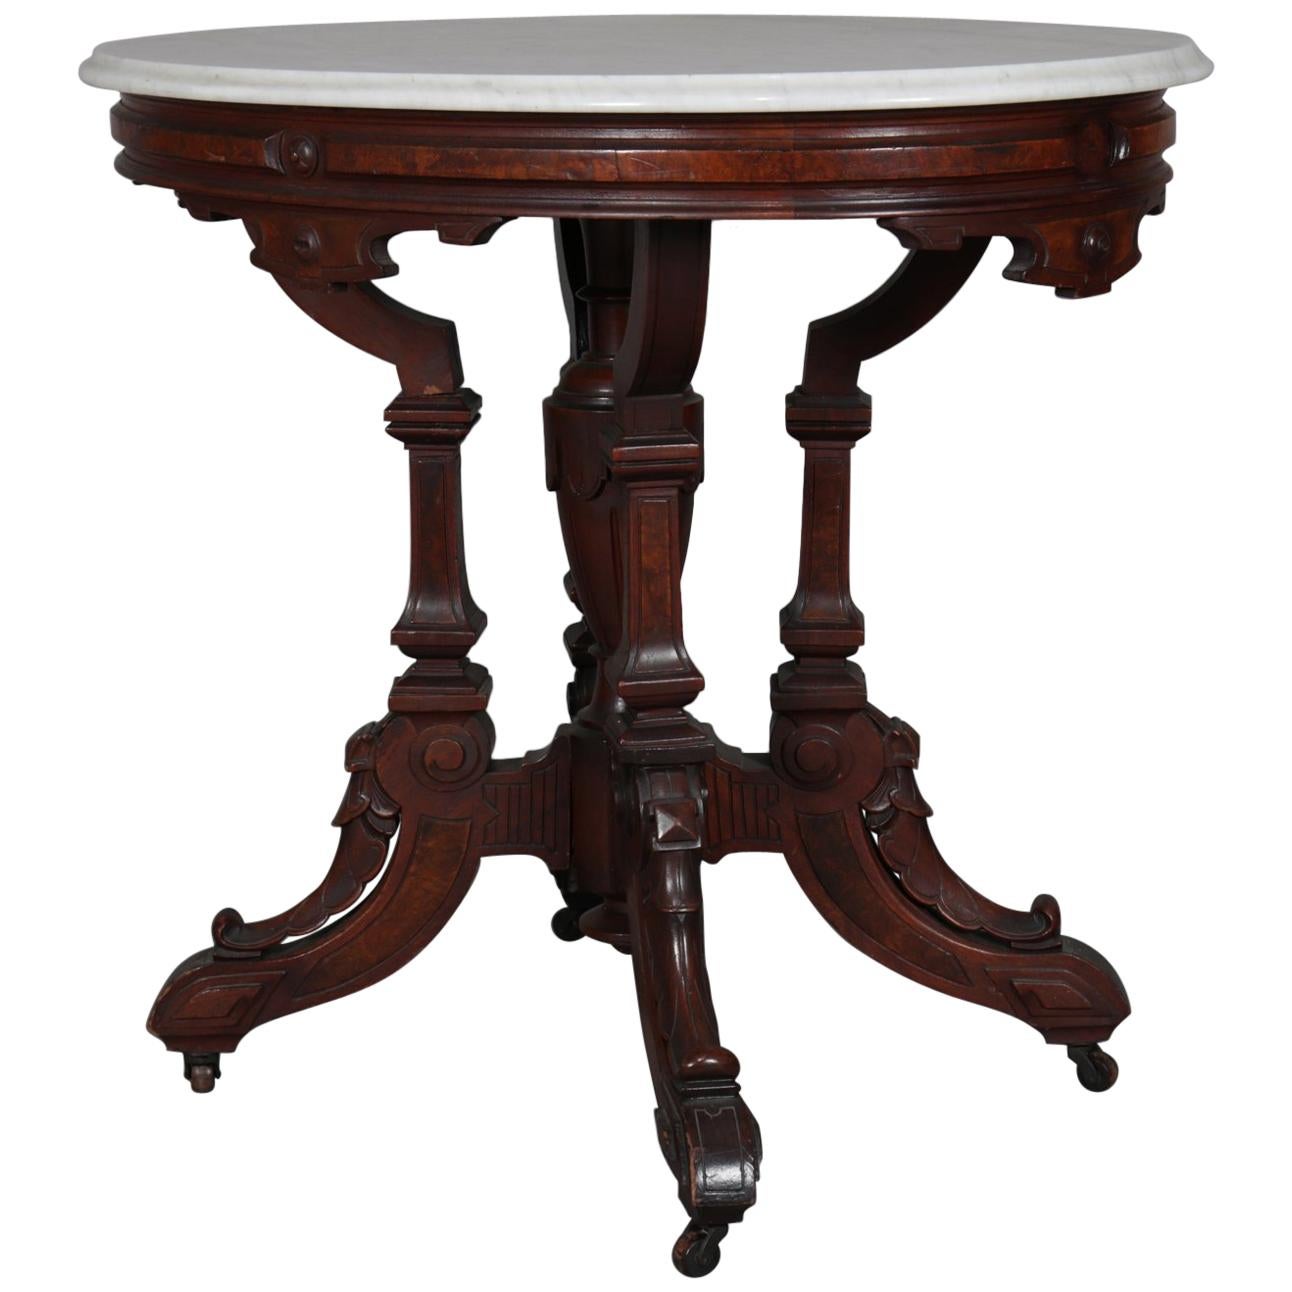 Antique Eastlake Carved Walnut and Burl Marble Top Oval Centre Table, circa 1870